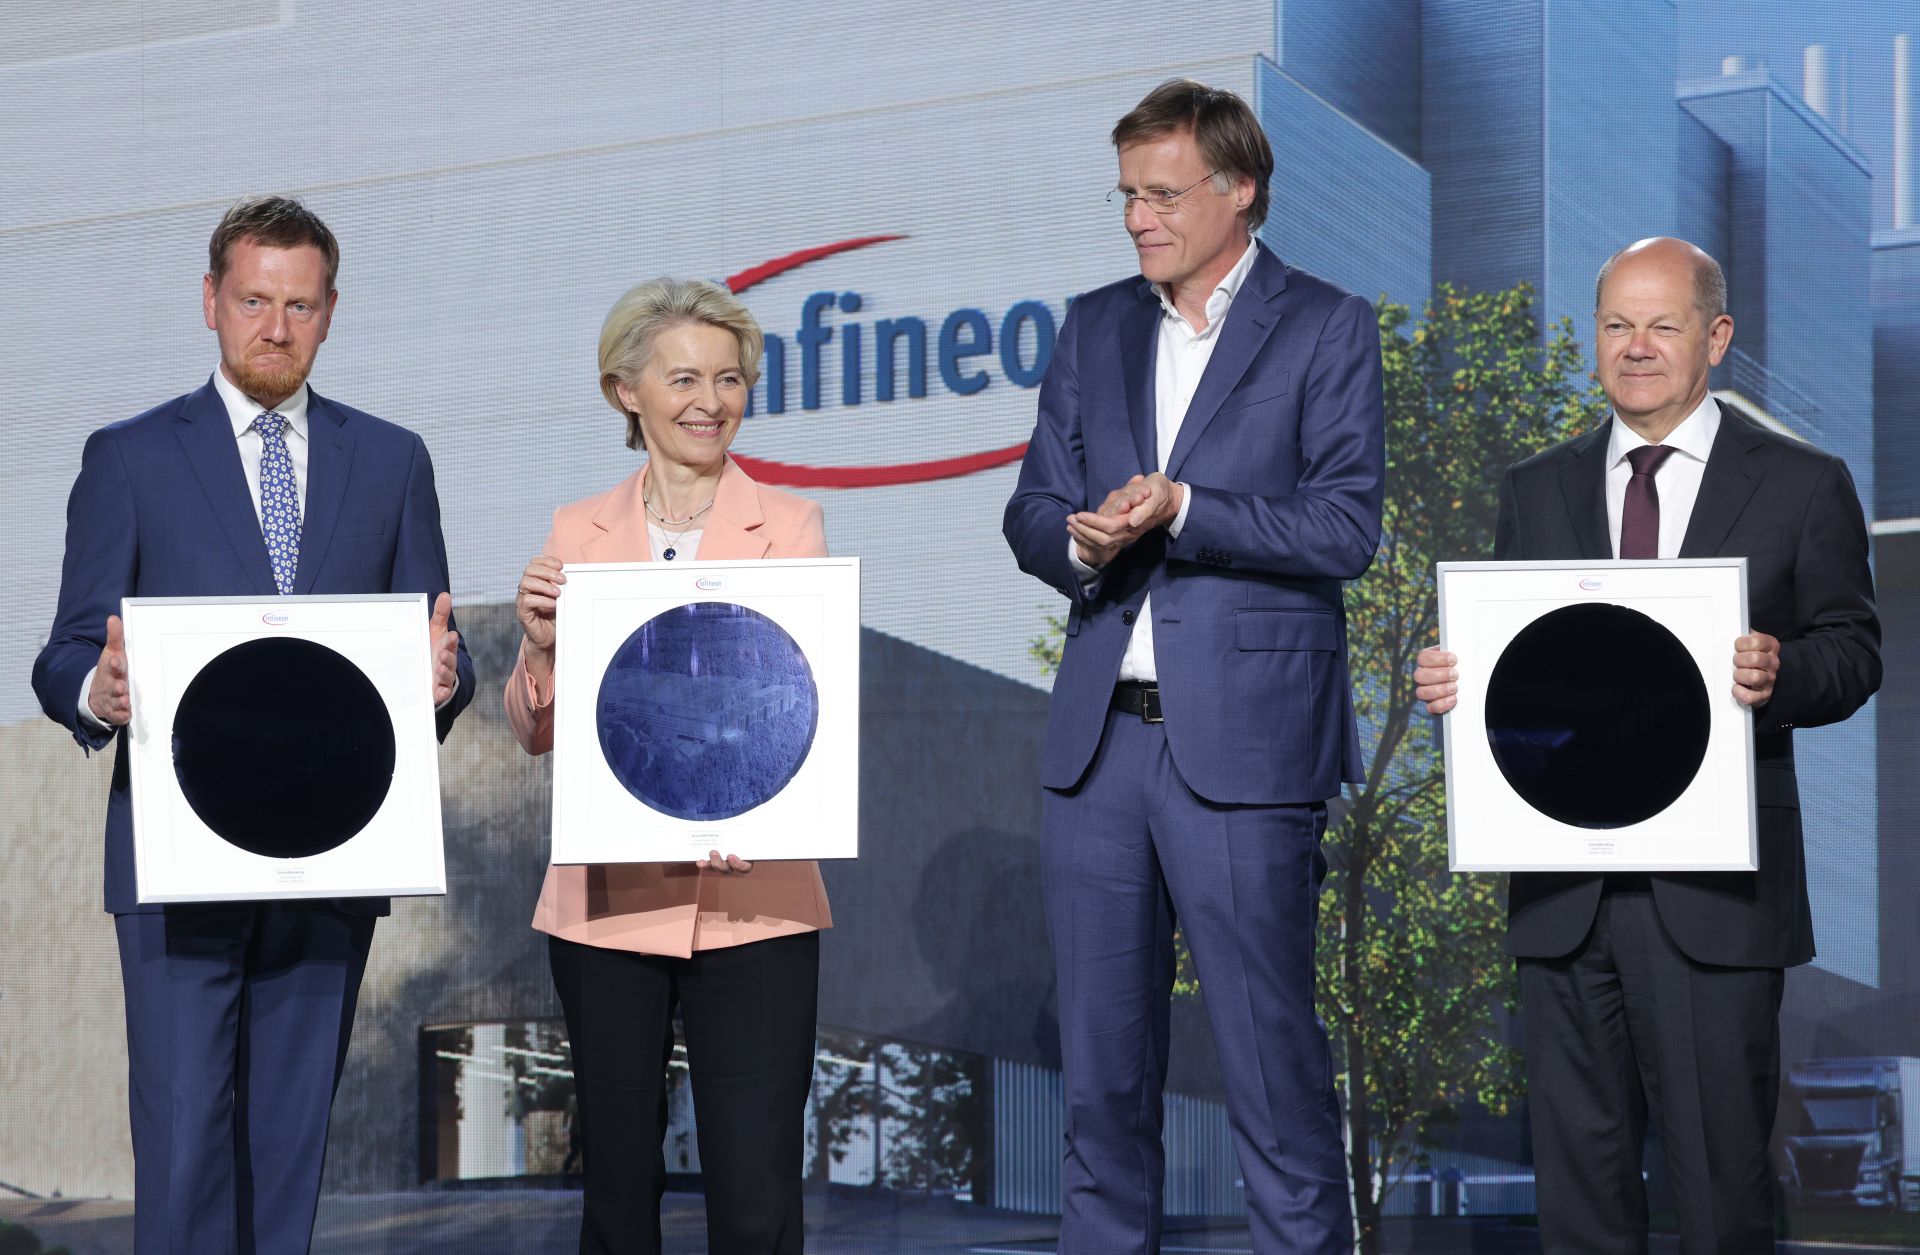 (L-R) Saxony Premier Michael Kretschmer, European Commission President Ursula von der Leyen and German Chancellor Olaf Scholz hold semiconductor wafers as Infineon CEO Jochen Hanebeck (second from right) looks on during a ground-breaking ceremony for a new semiconductor factory in Dresden, Germany, on May 2, 2023. 